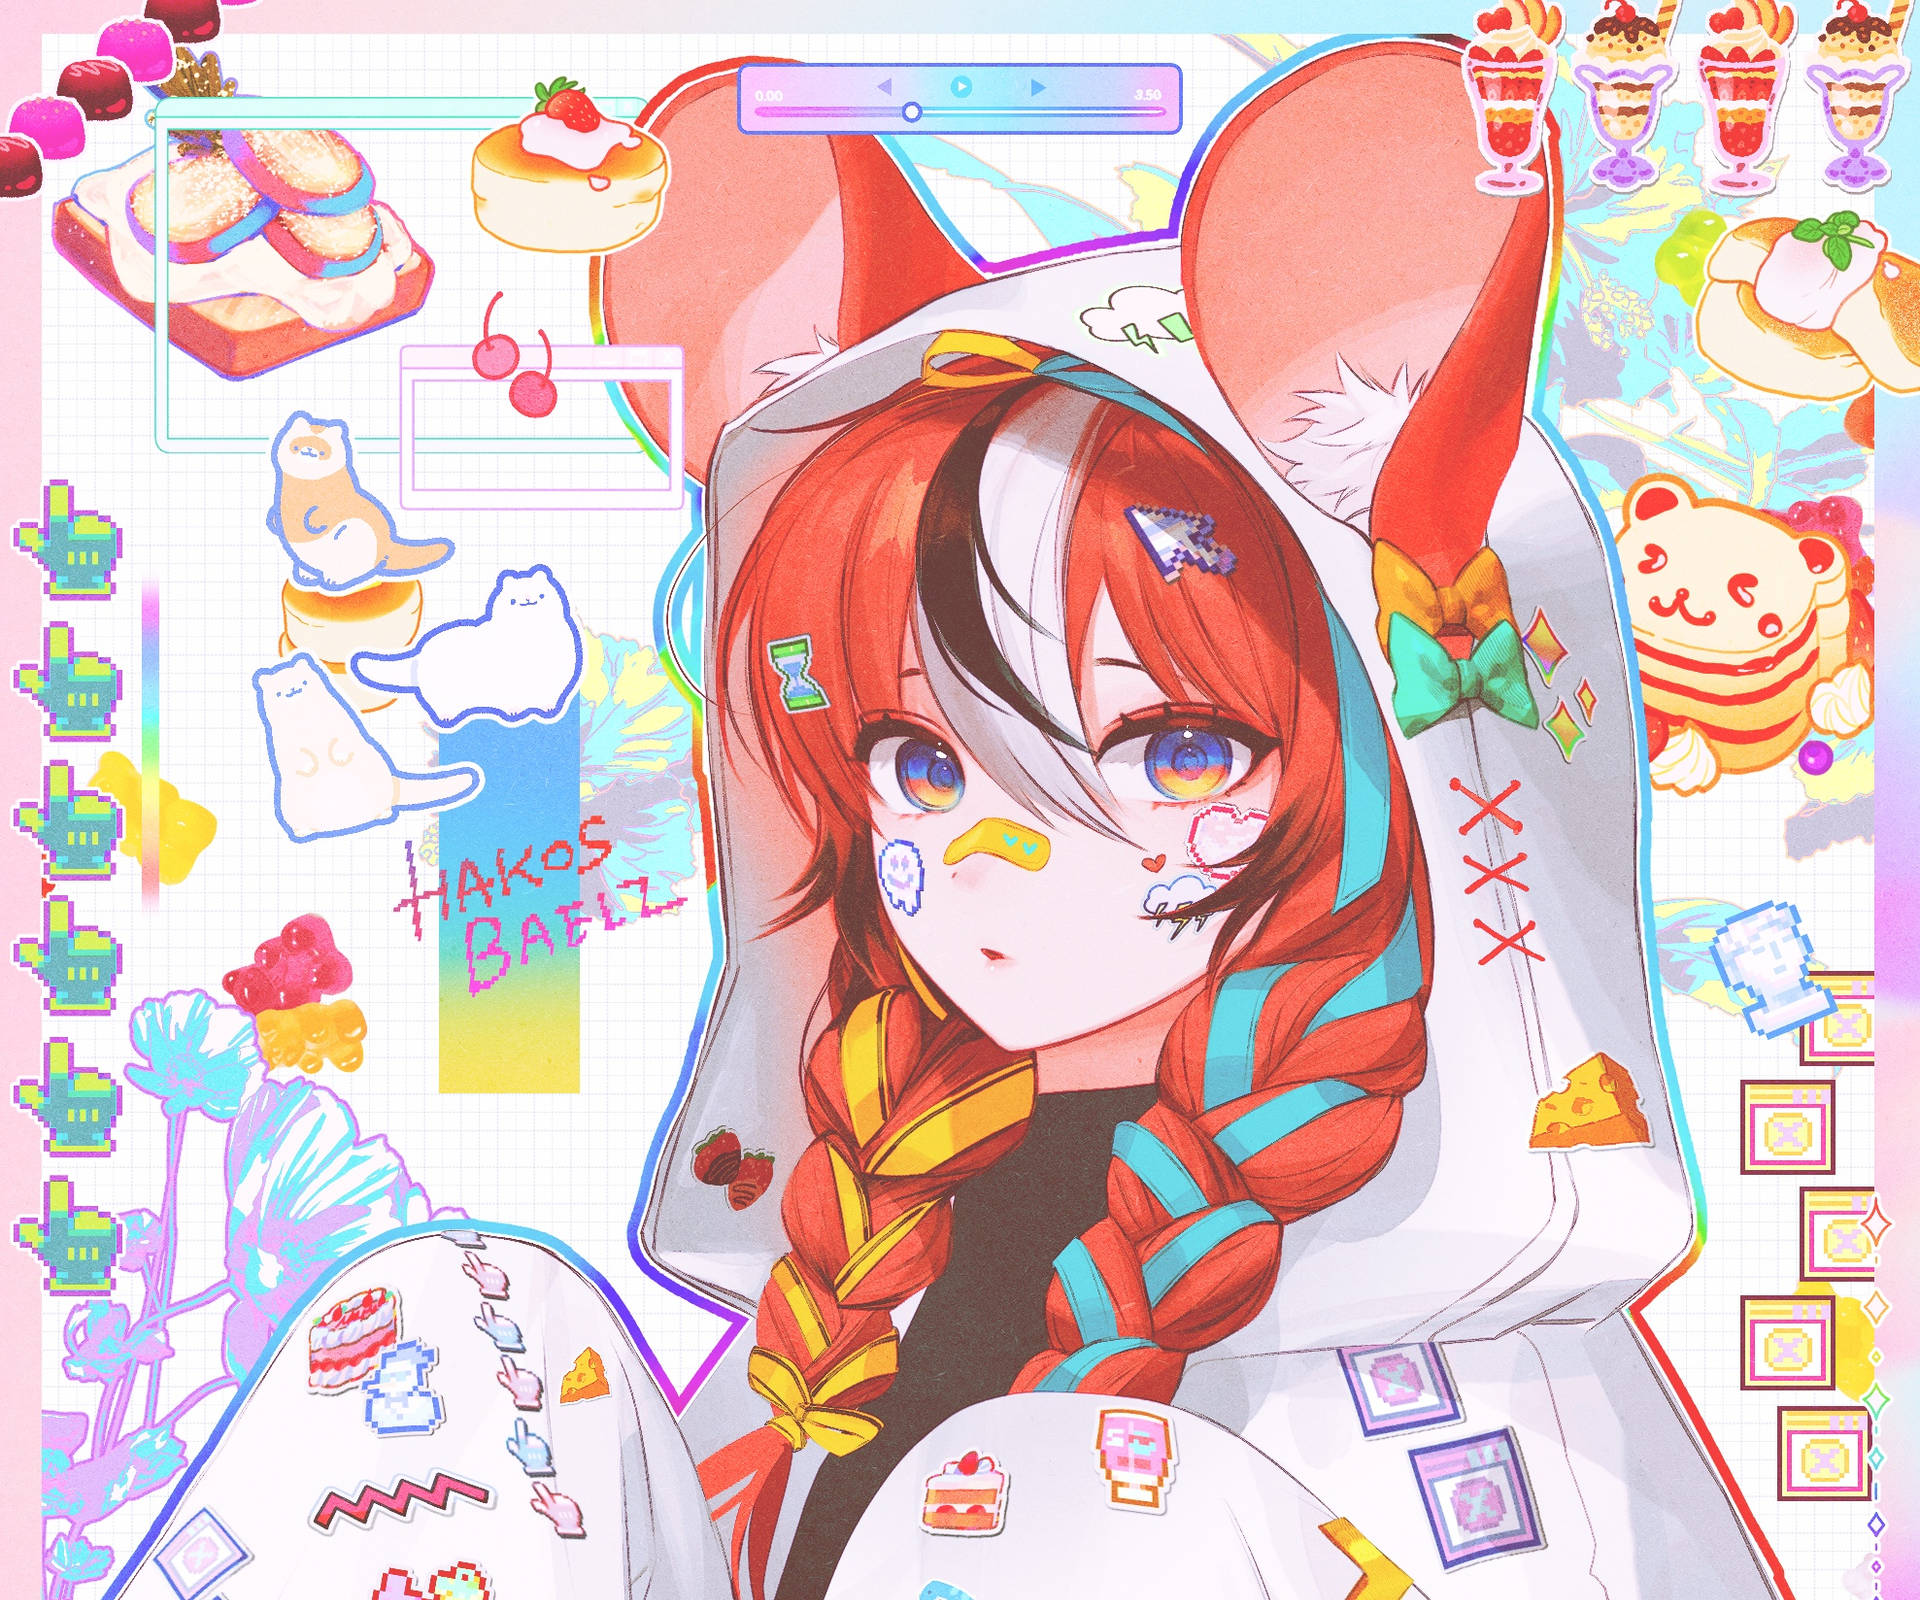 Hakos Baelz from Hololive in a Creative Illustration Wallpaper